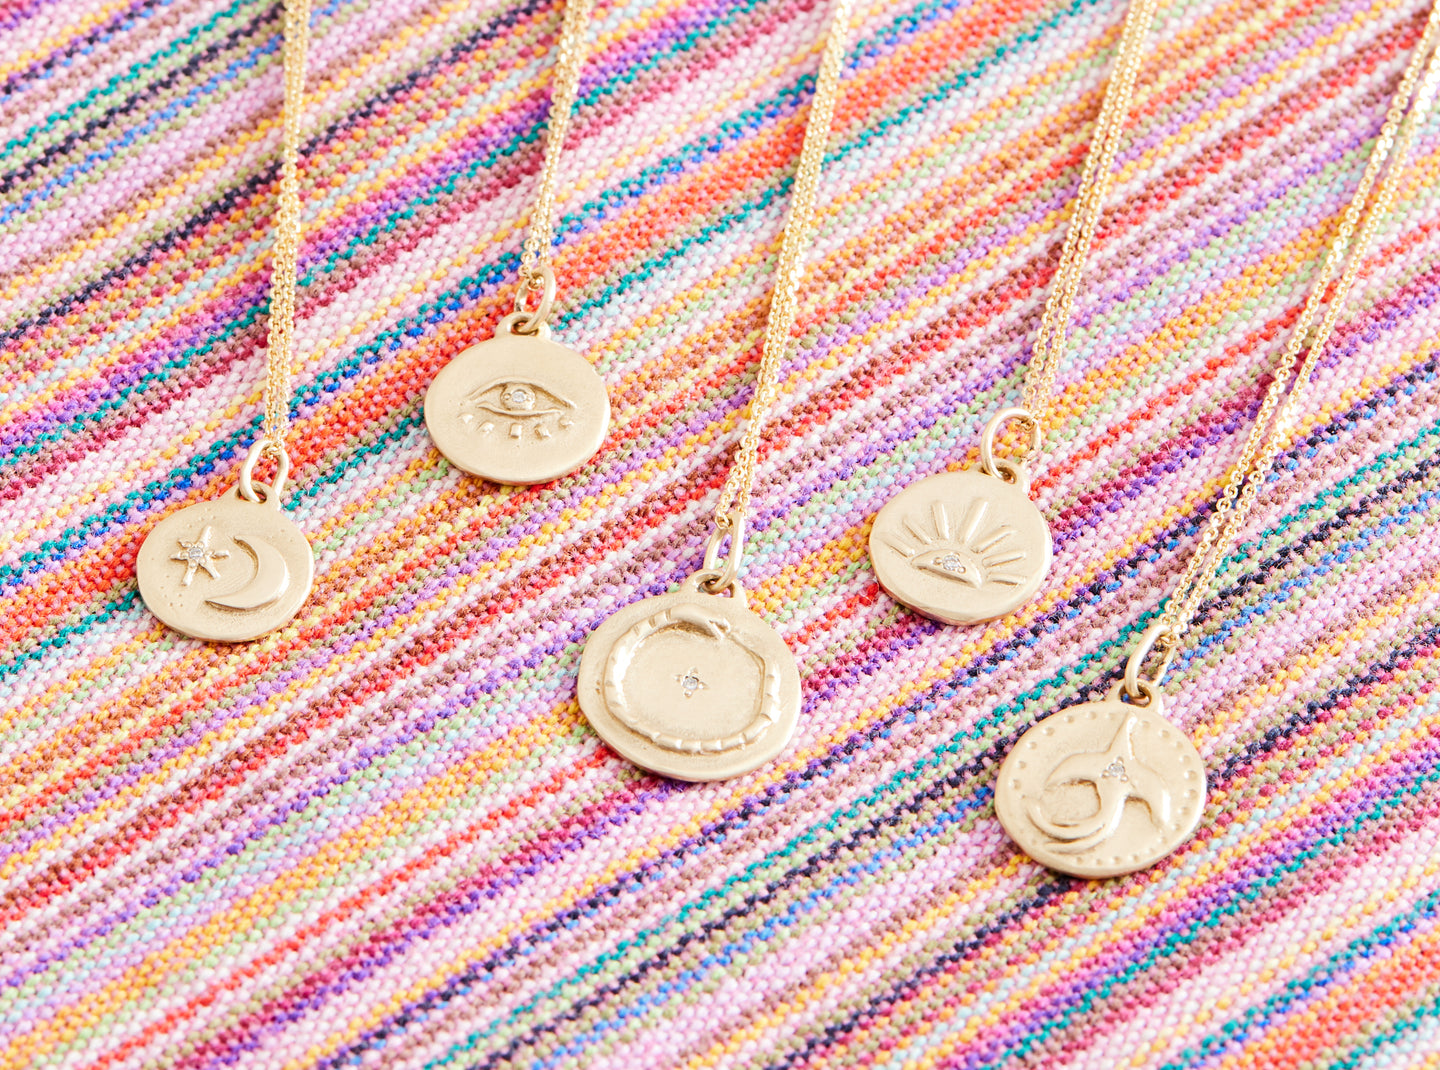 Five gold necklaces on gold chain, each one with a different symbol: moon with star, eye with lashes, snake eating its tail, rising sun with rays, bird taking flight. All of them have diamonds set in the center